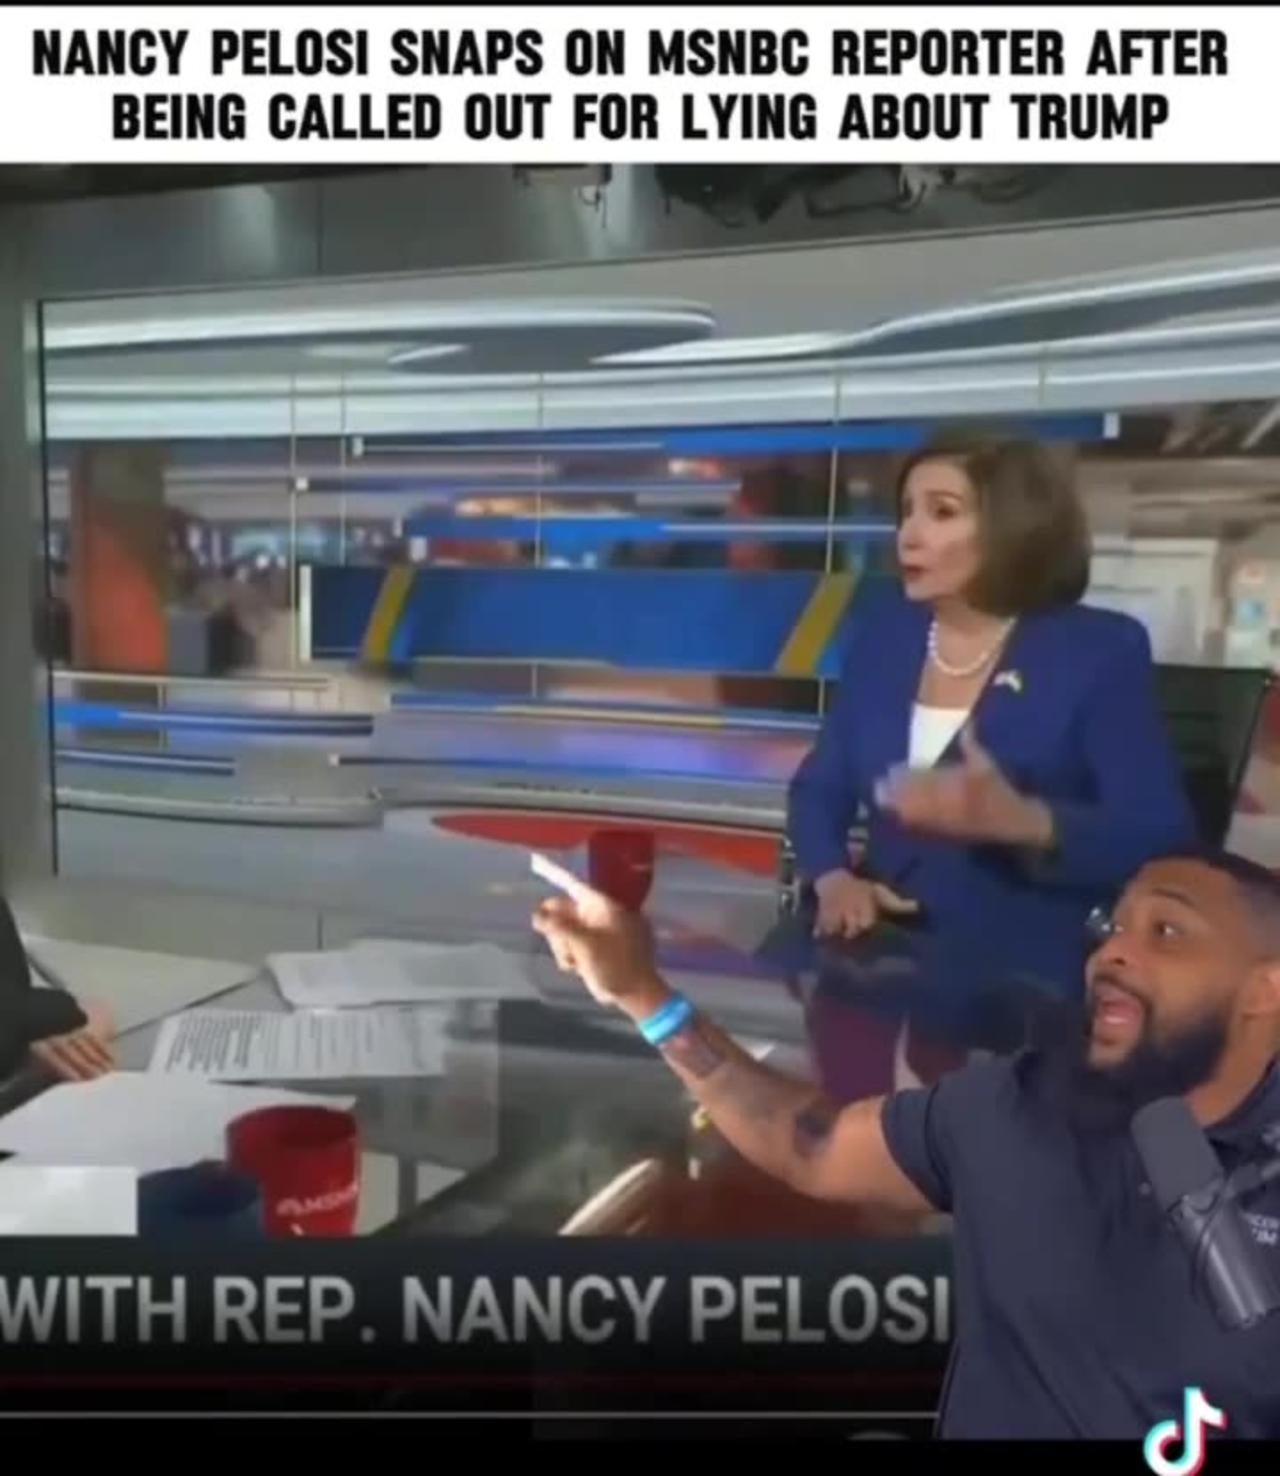 Nancy Pelosi snapping when getting called out never gets old.